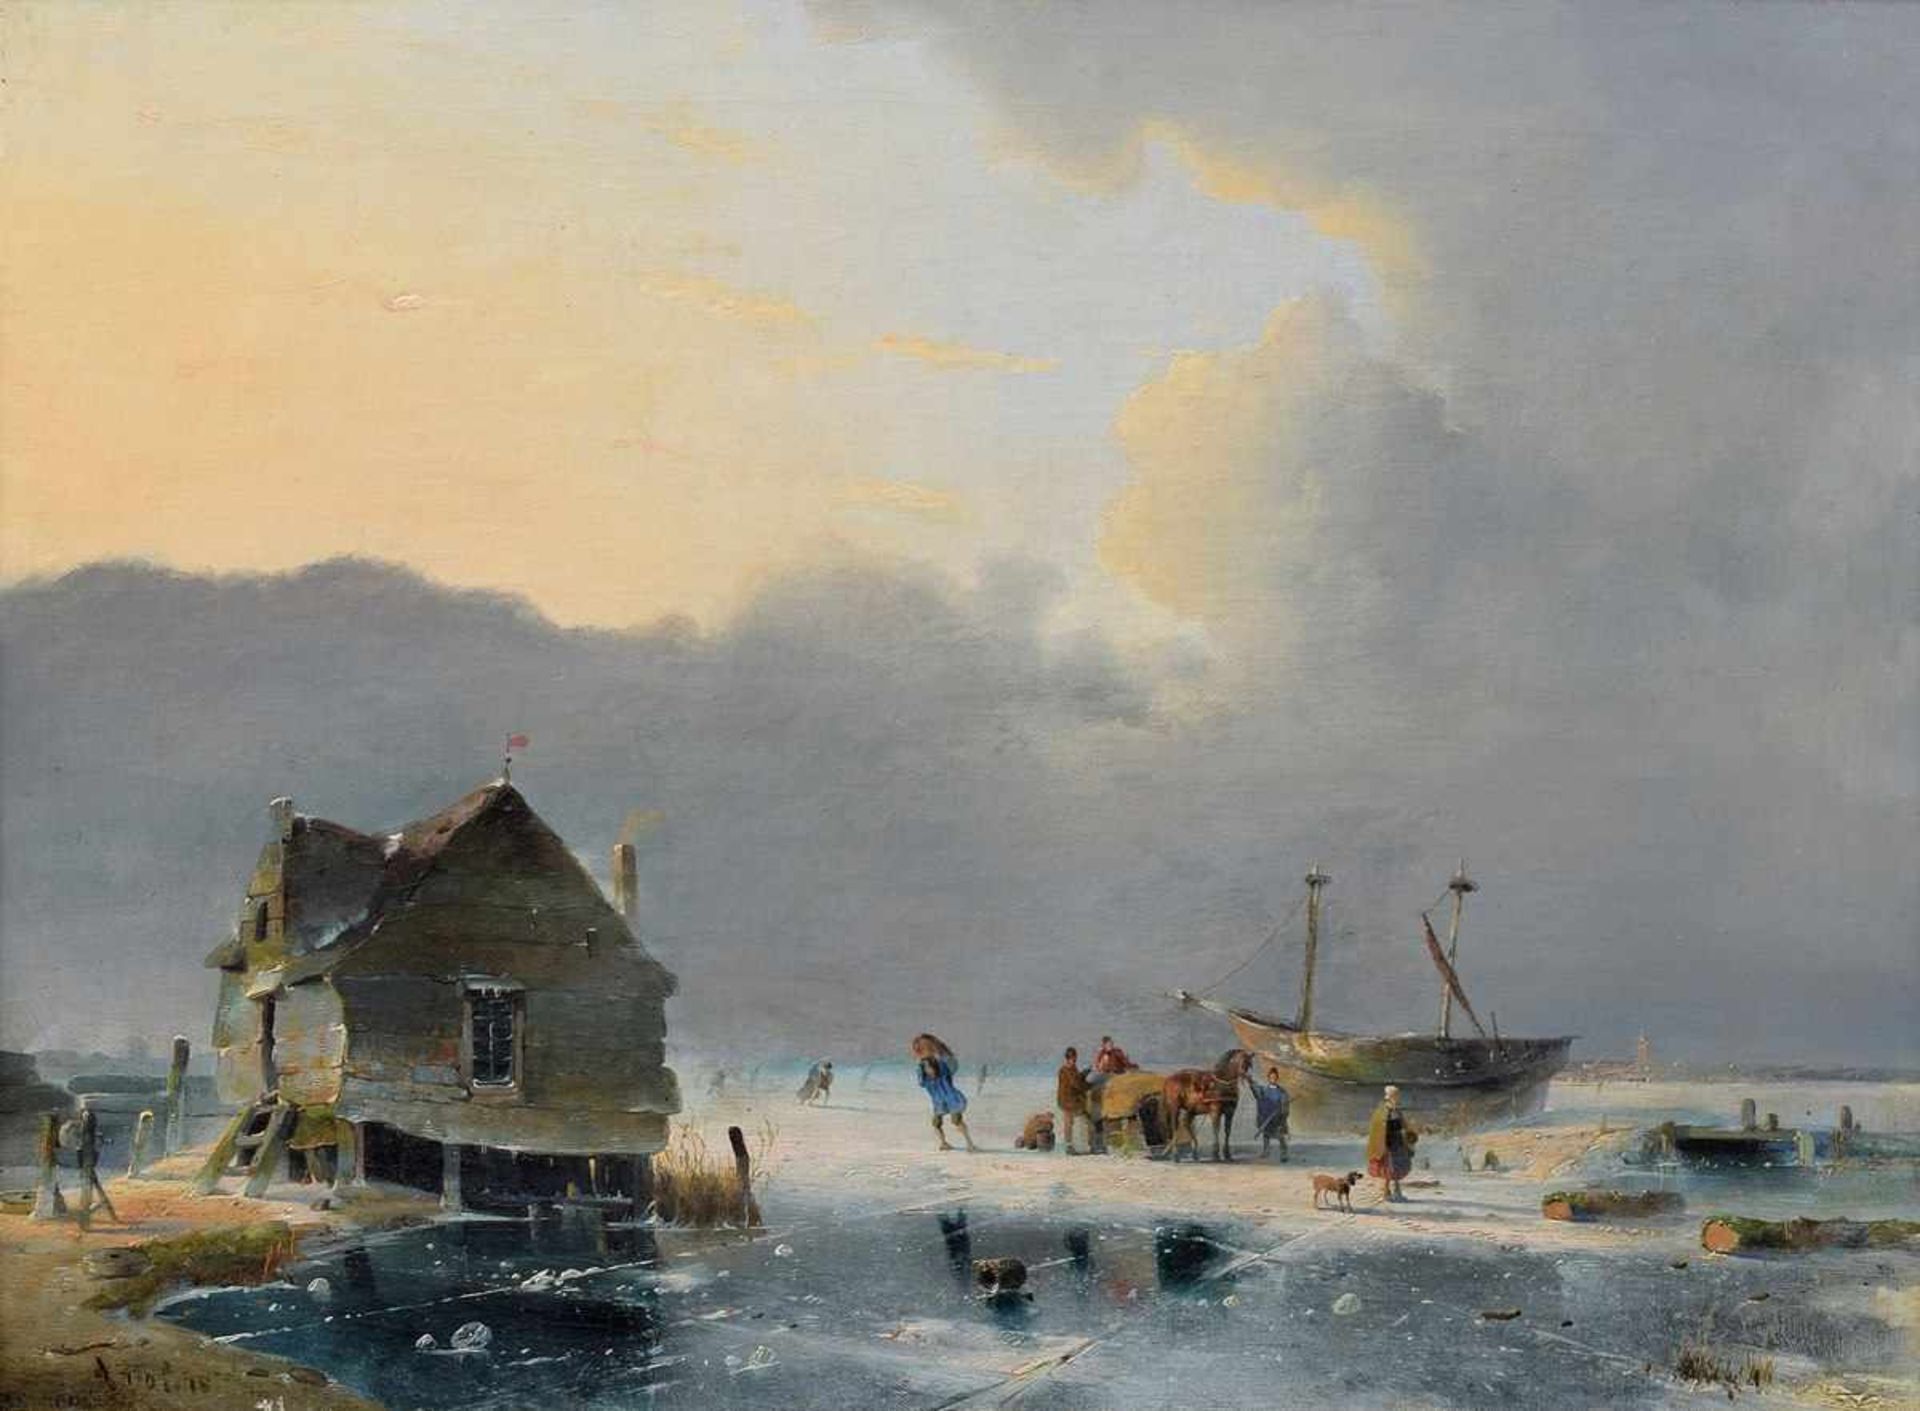 Unknown painter of the 19th century "Dutch Winter Scene", oil/canvas mounted, lower left illegible